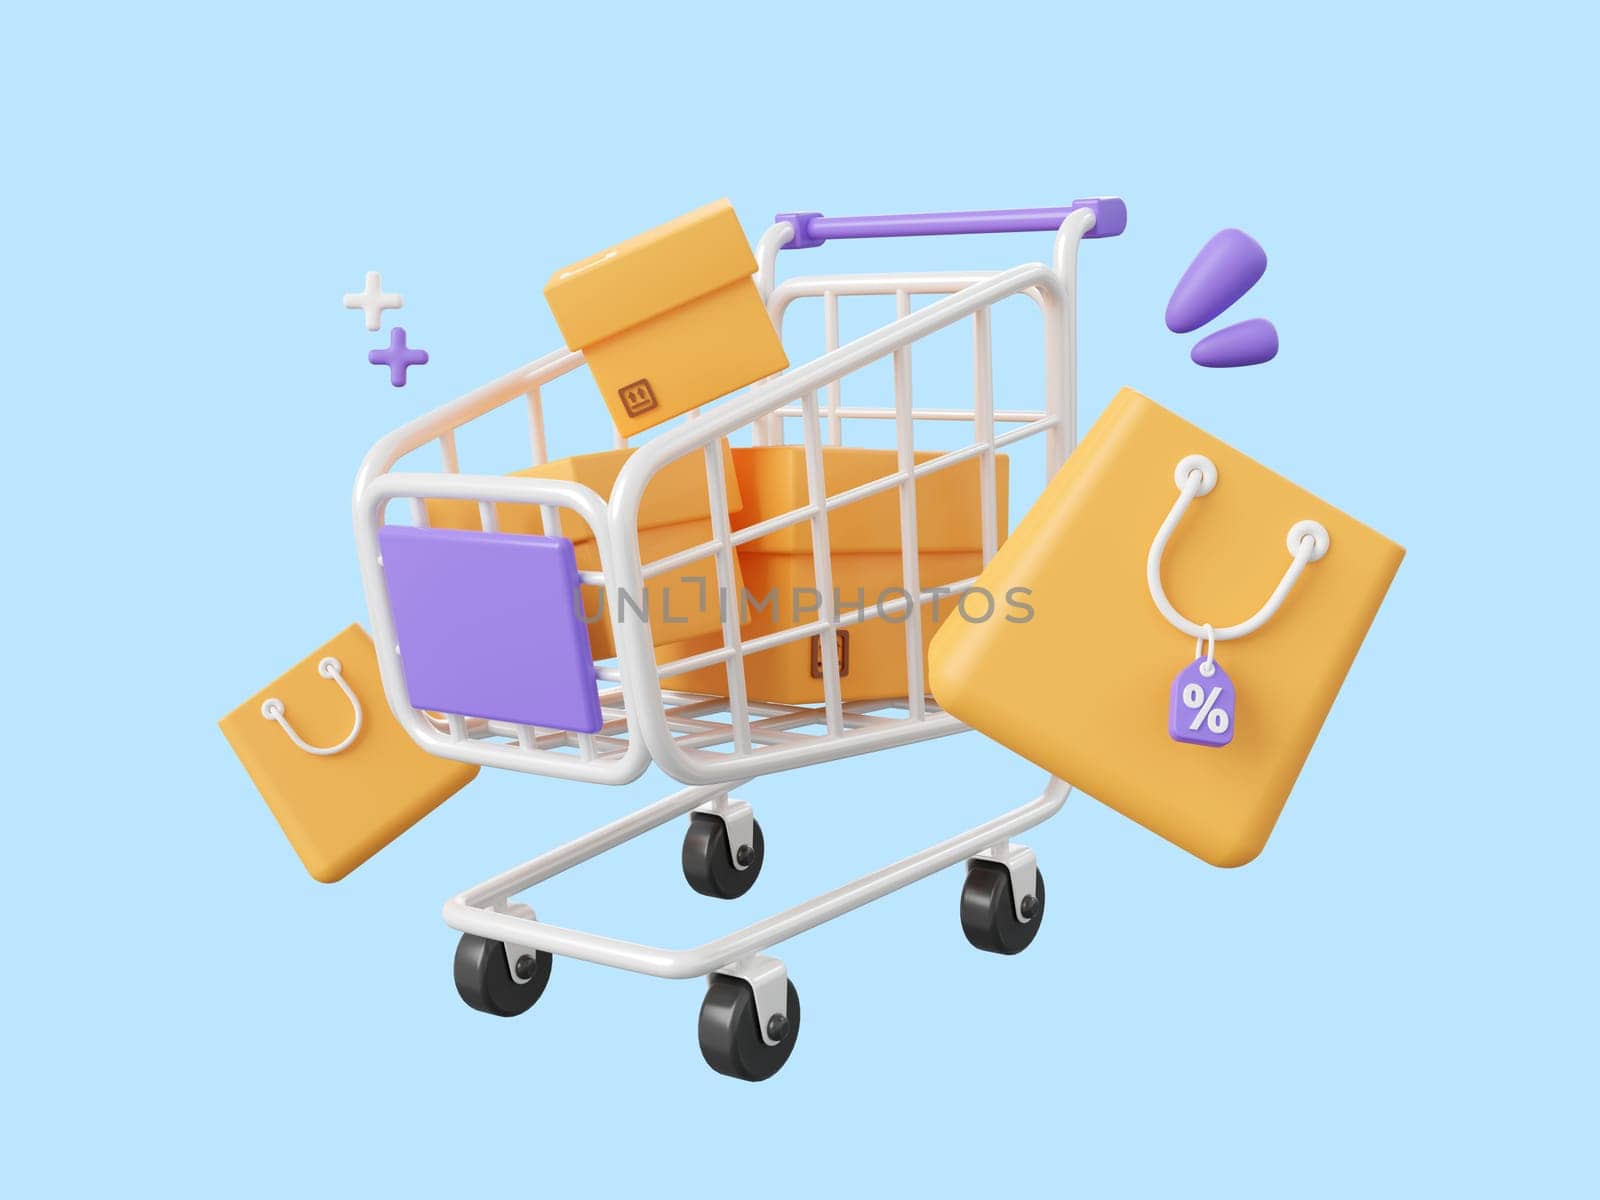 3d cartoon design illustration of Shopping cart with parcel box and shopping bags with discount tag, Shopping online concept. by nutzchotwarut